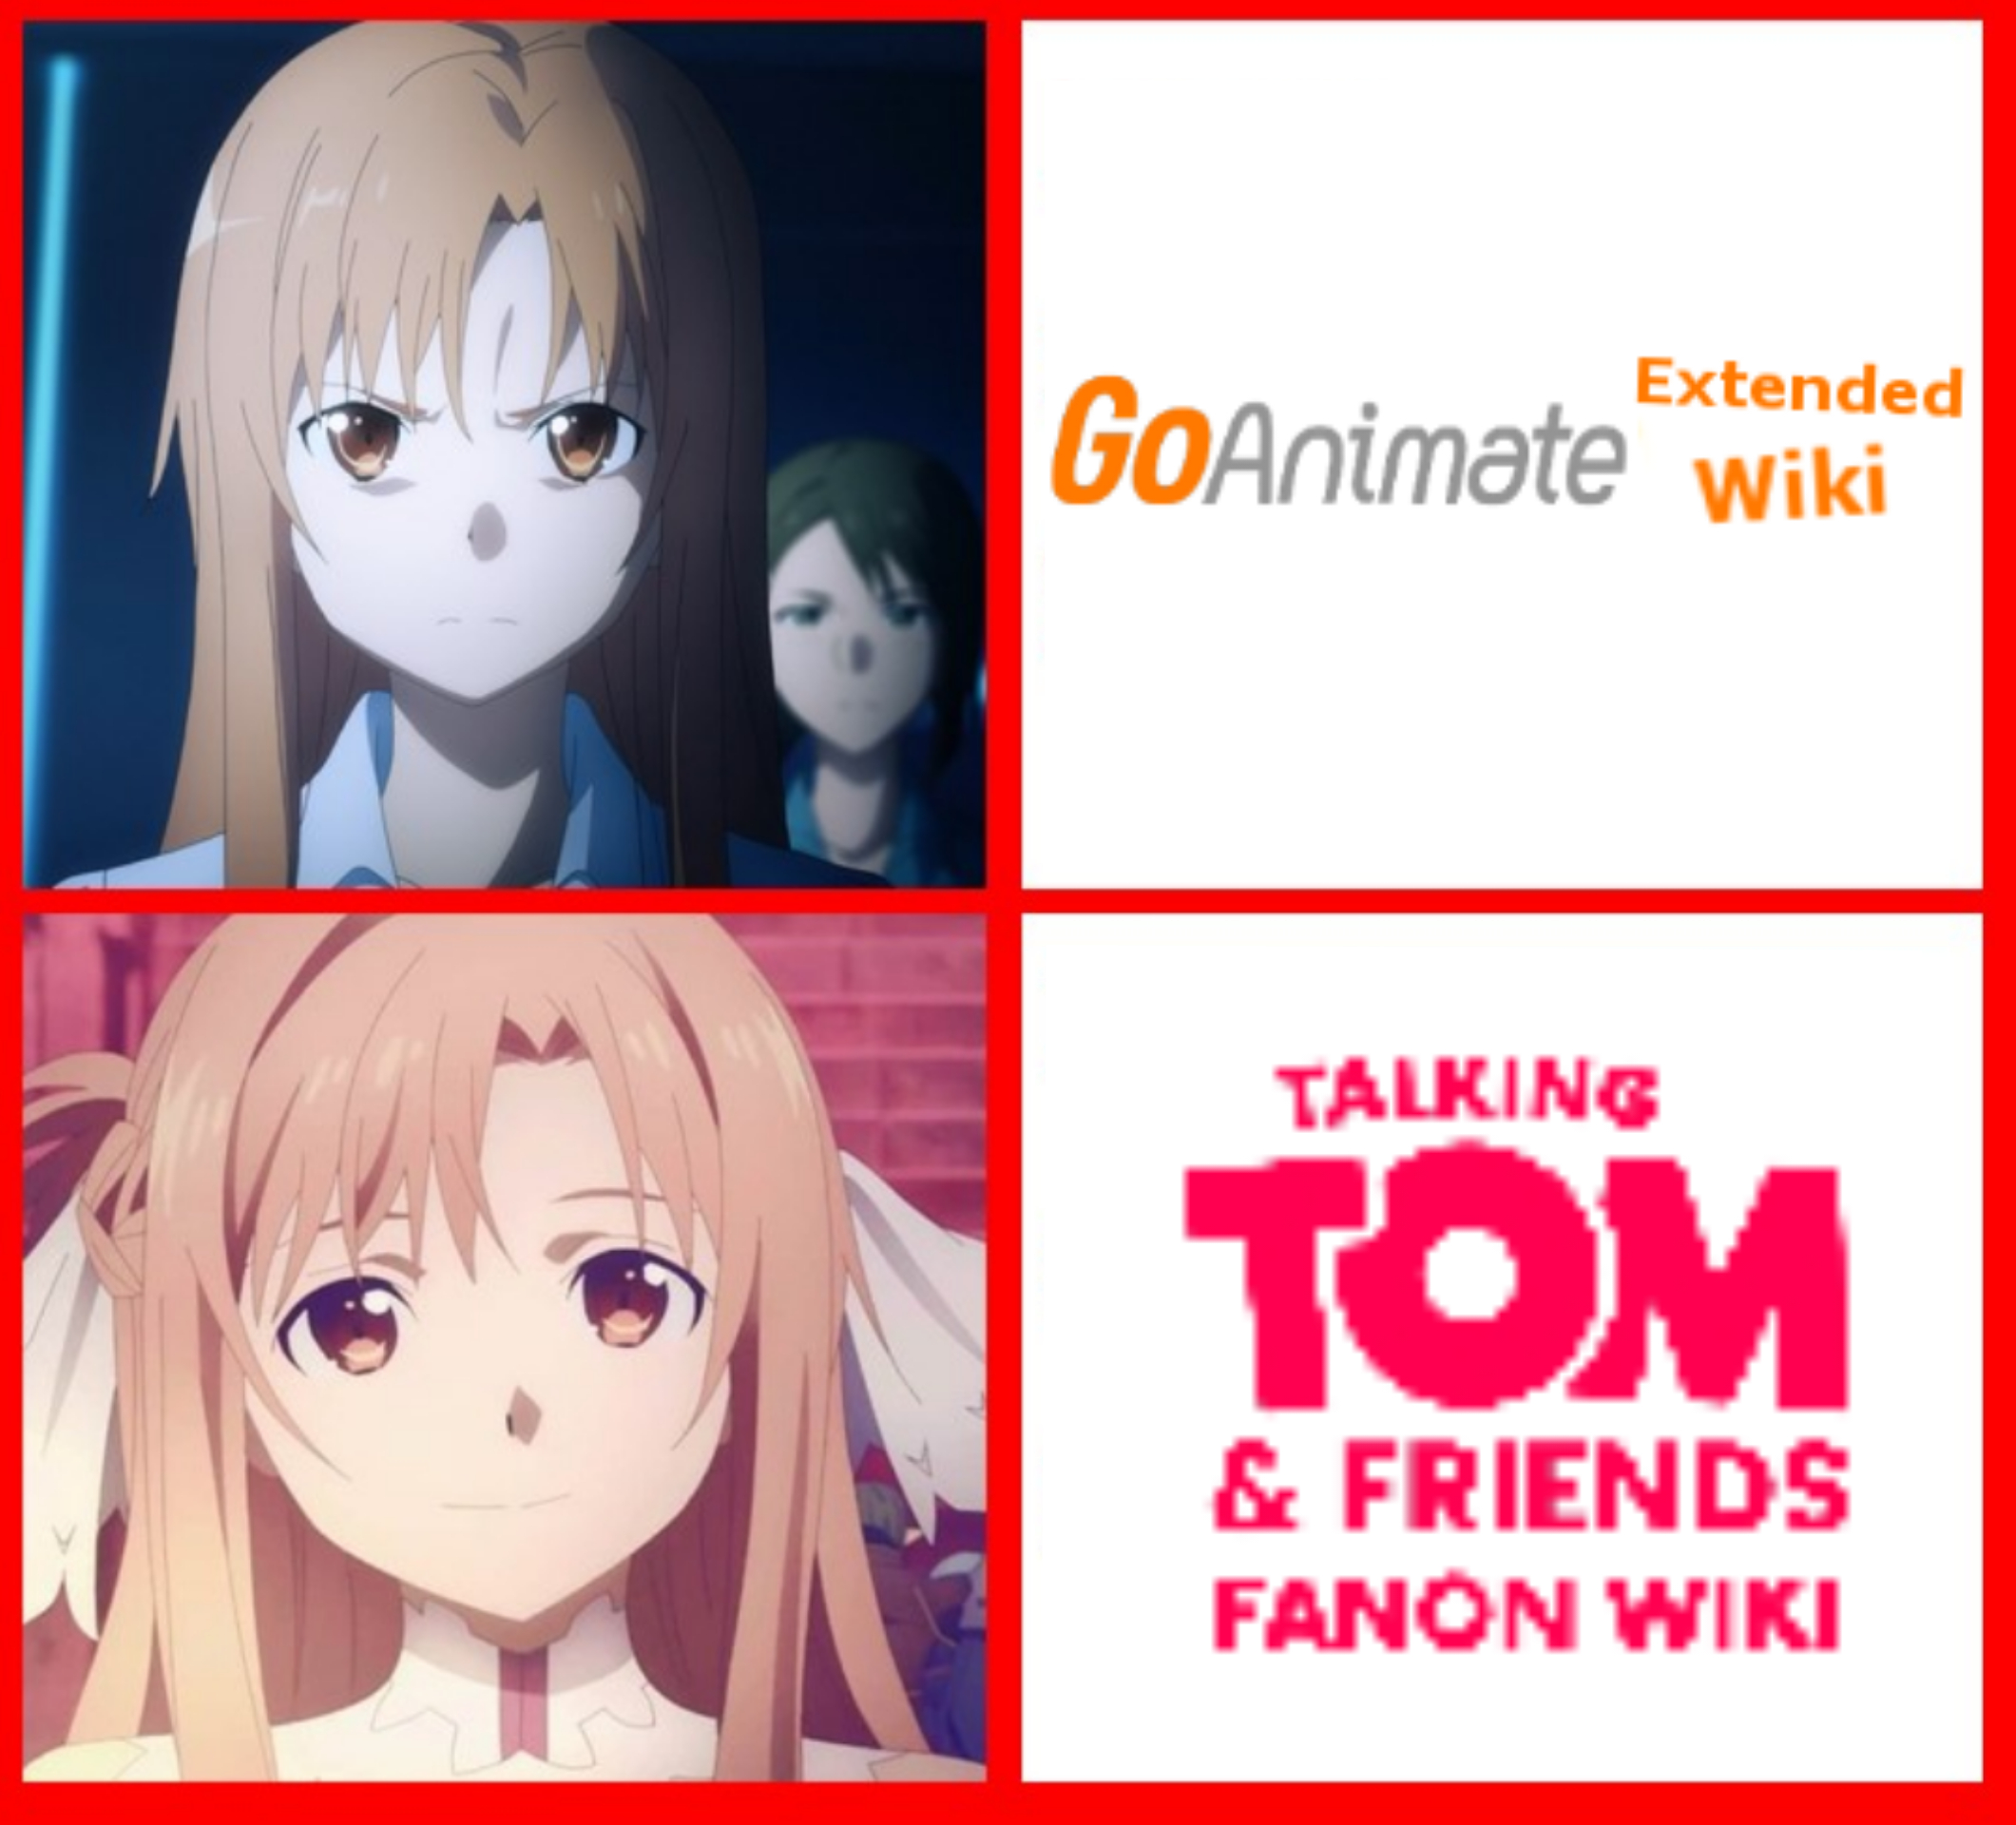 Asuna Prefer Talking Tom And Friends Fanon Wiki by UP844TrainFans2022 on  DeviantArt